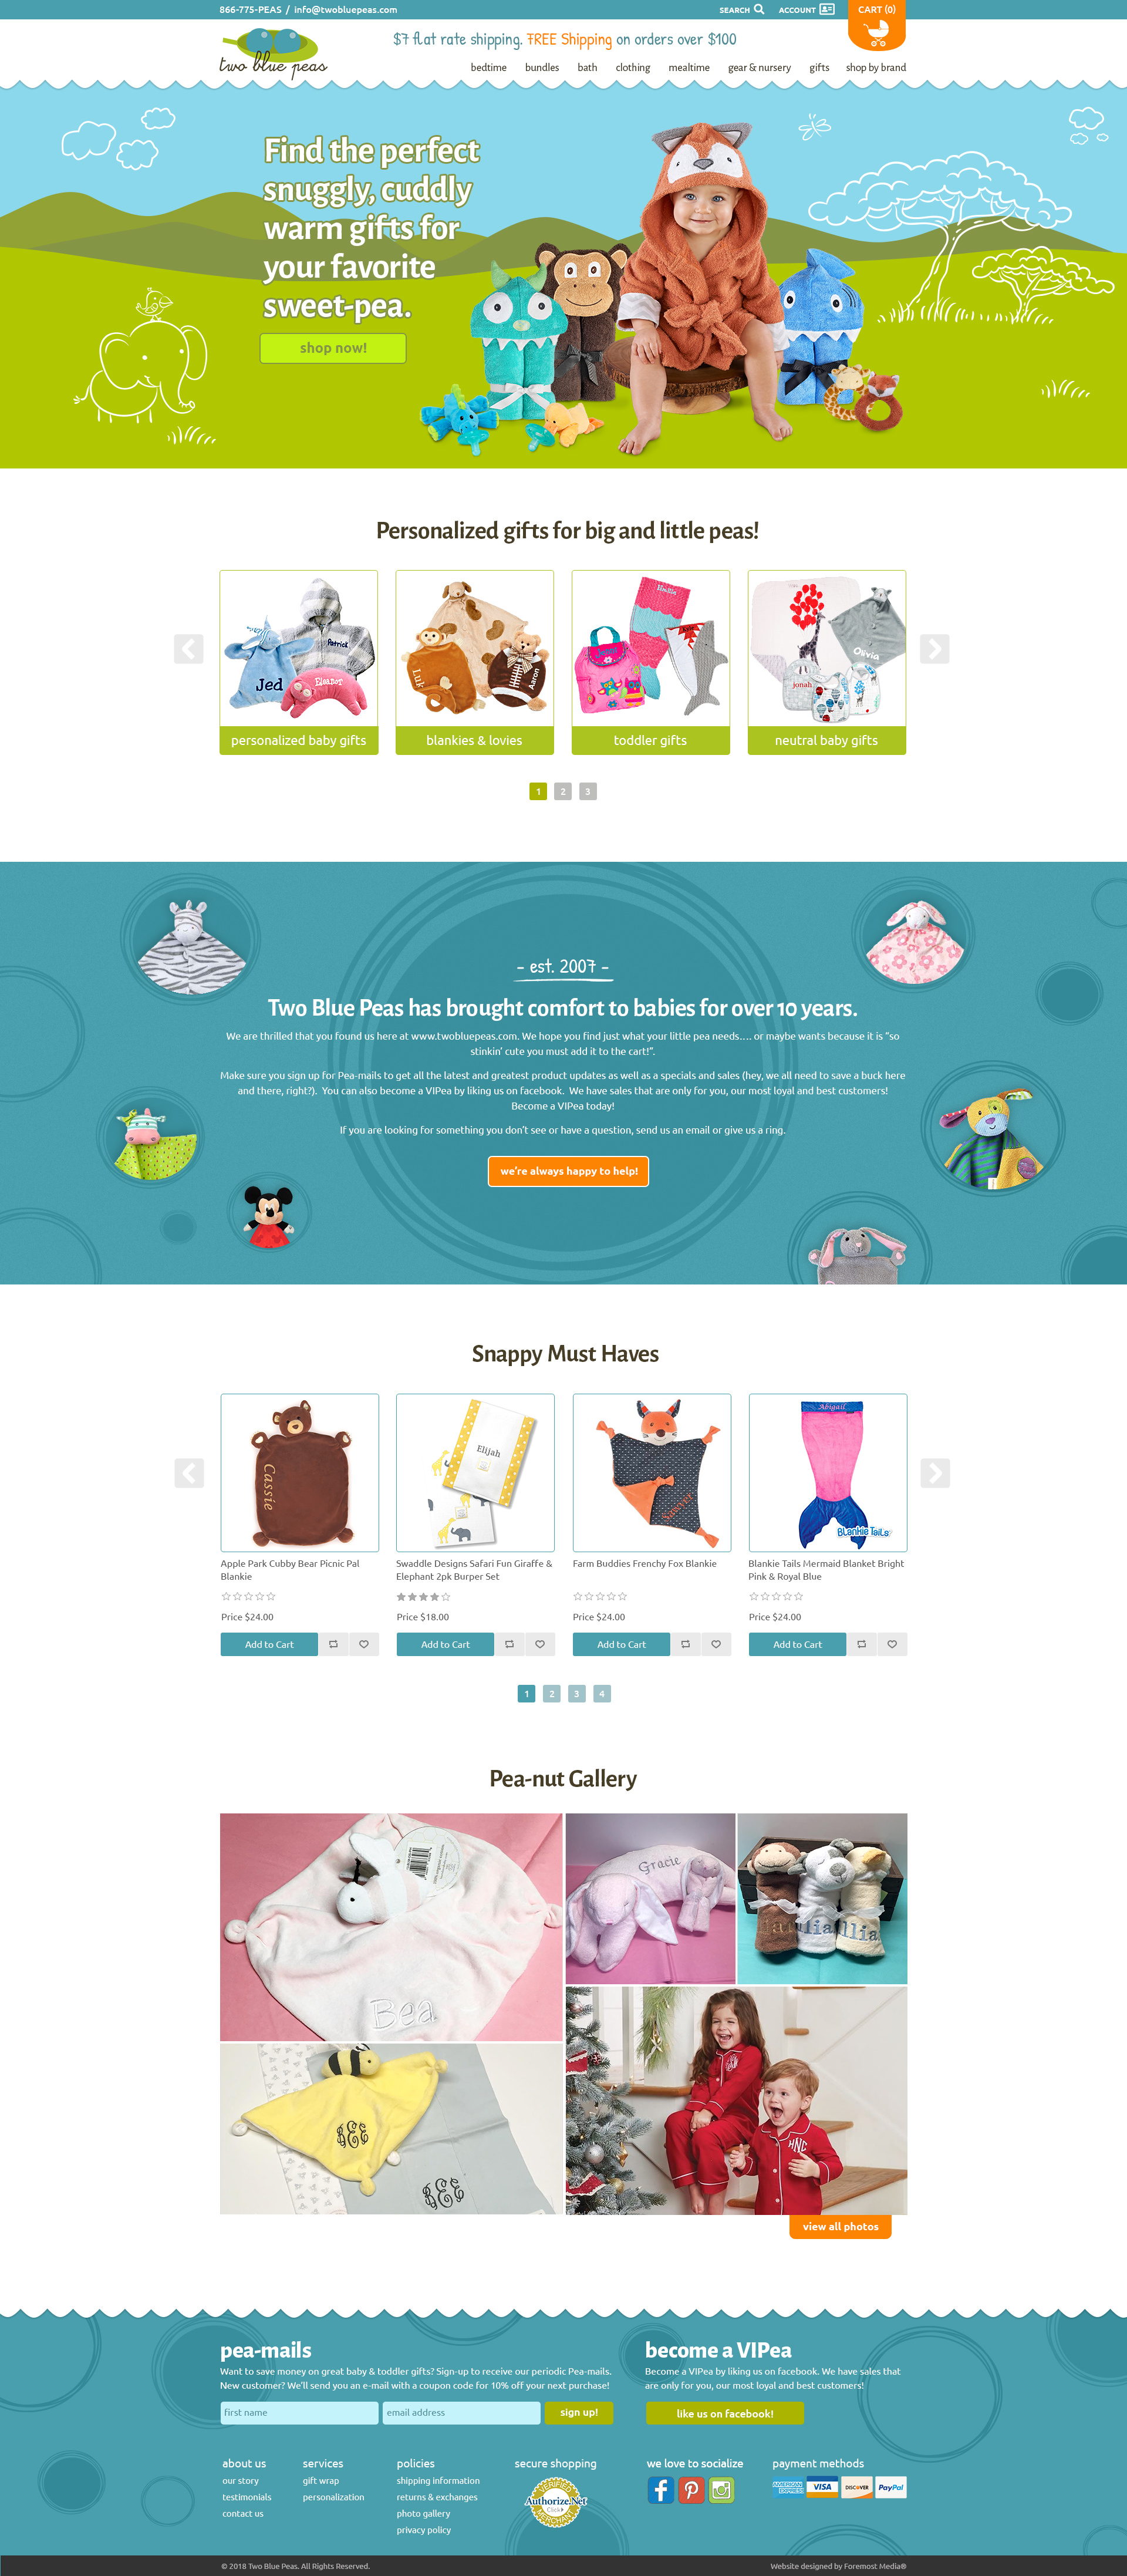 Example of the new and improved nopCommerce website designed by Foremost Media for Two Blue Peas